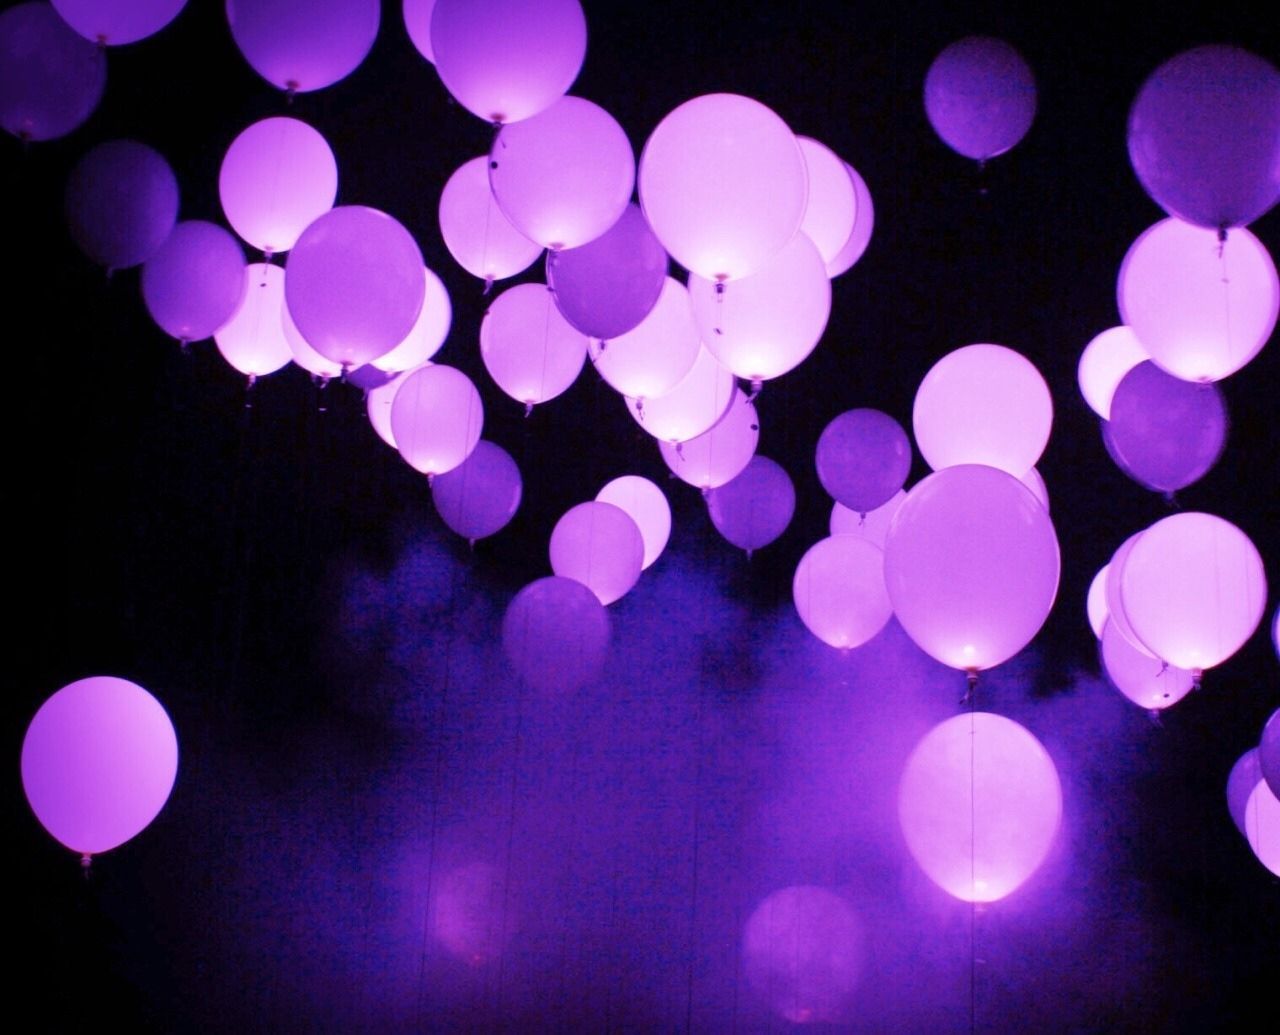 Many purple balloons floating in the air. - Balloons